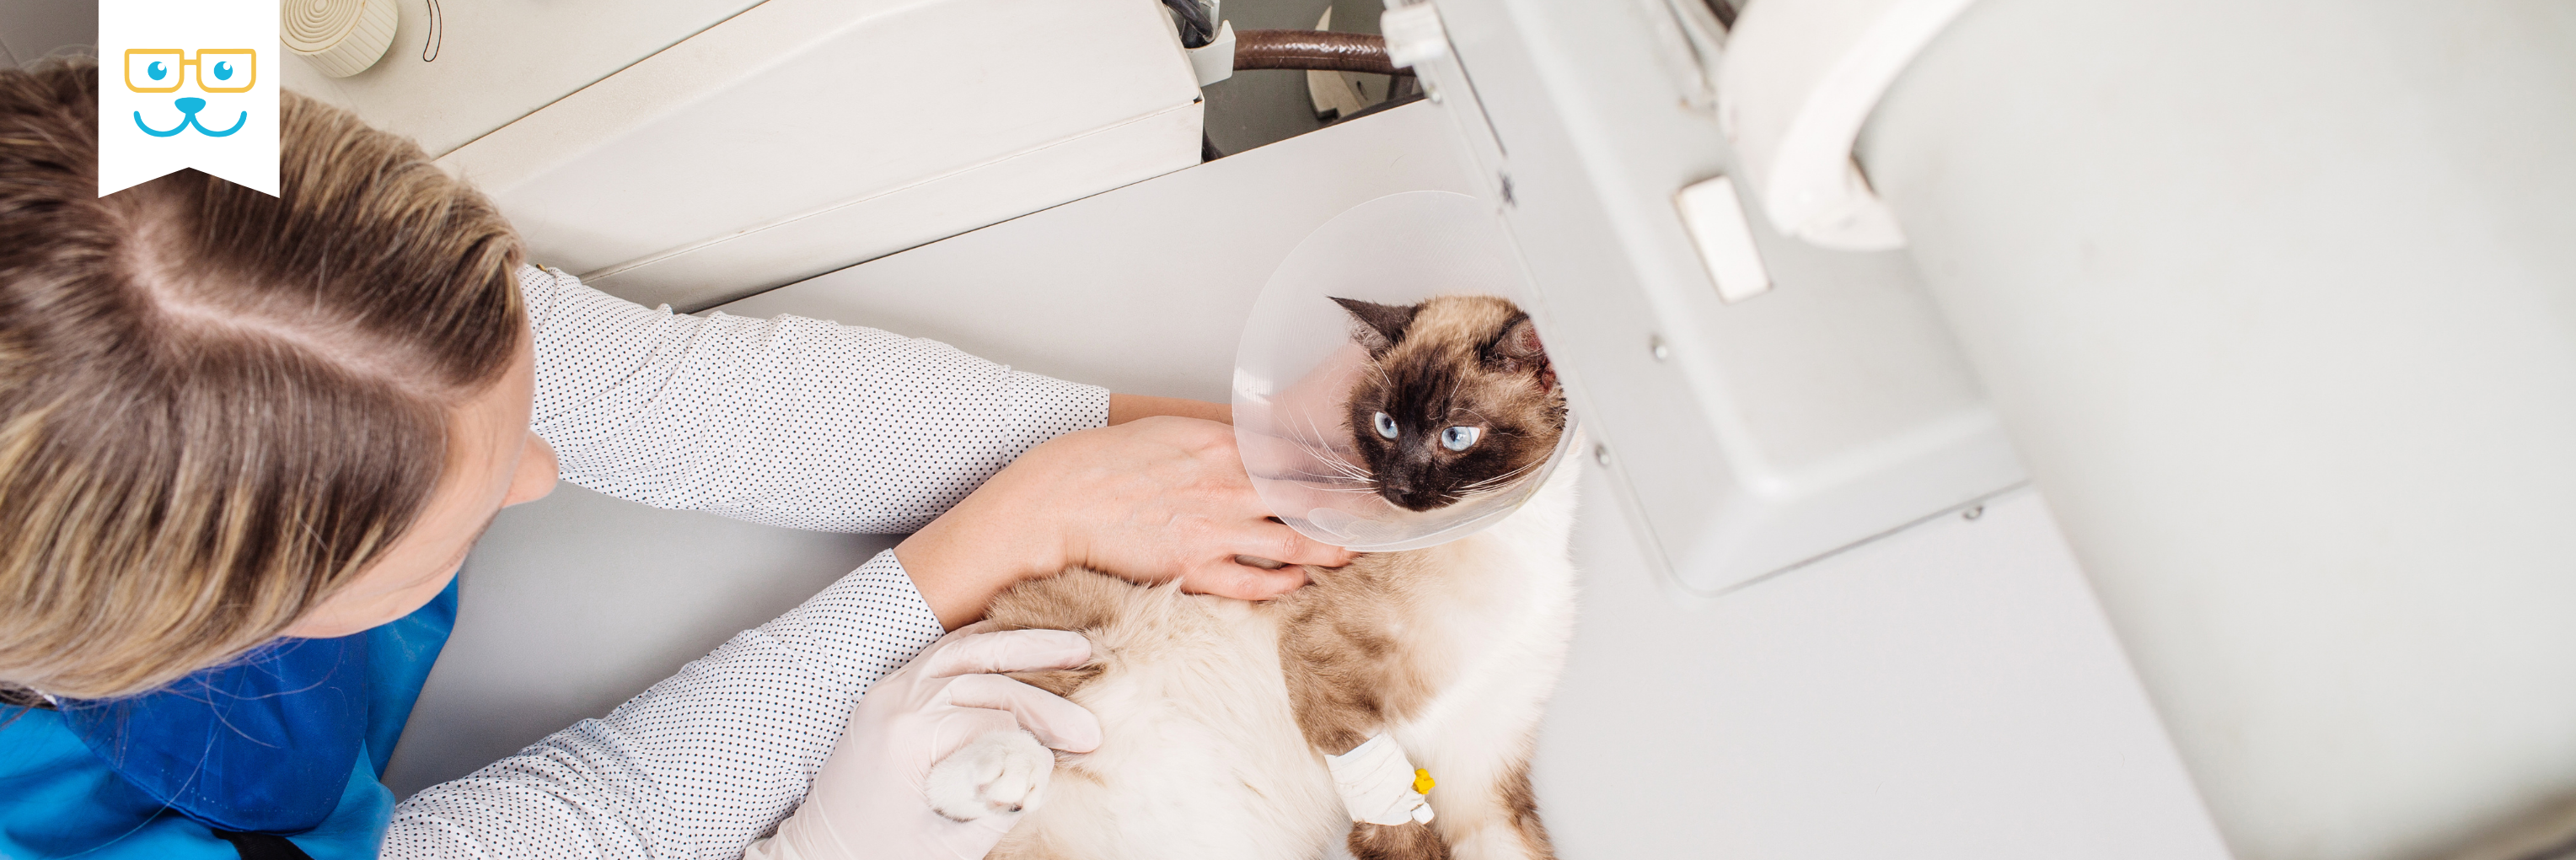 cat diagnostic imaging and ultrasound